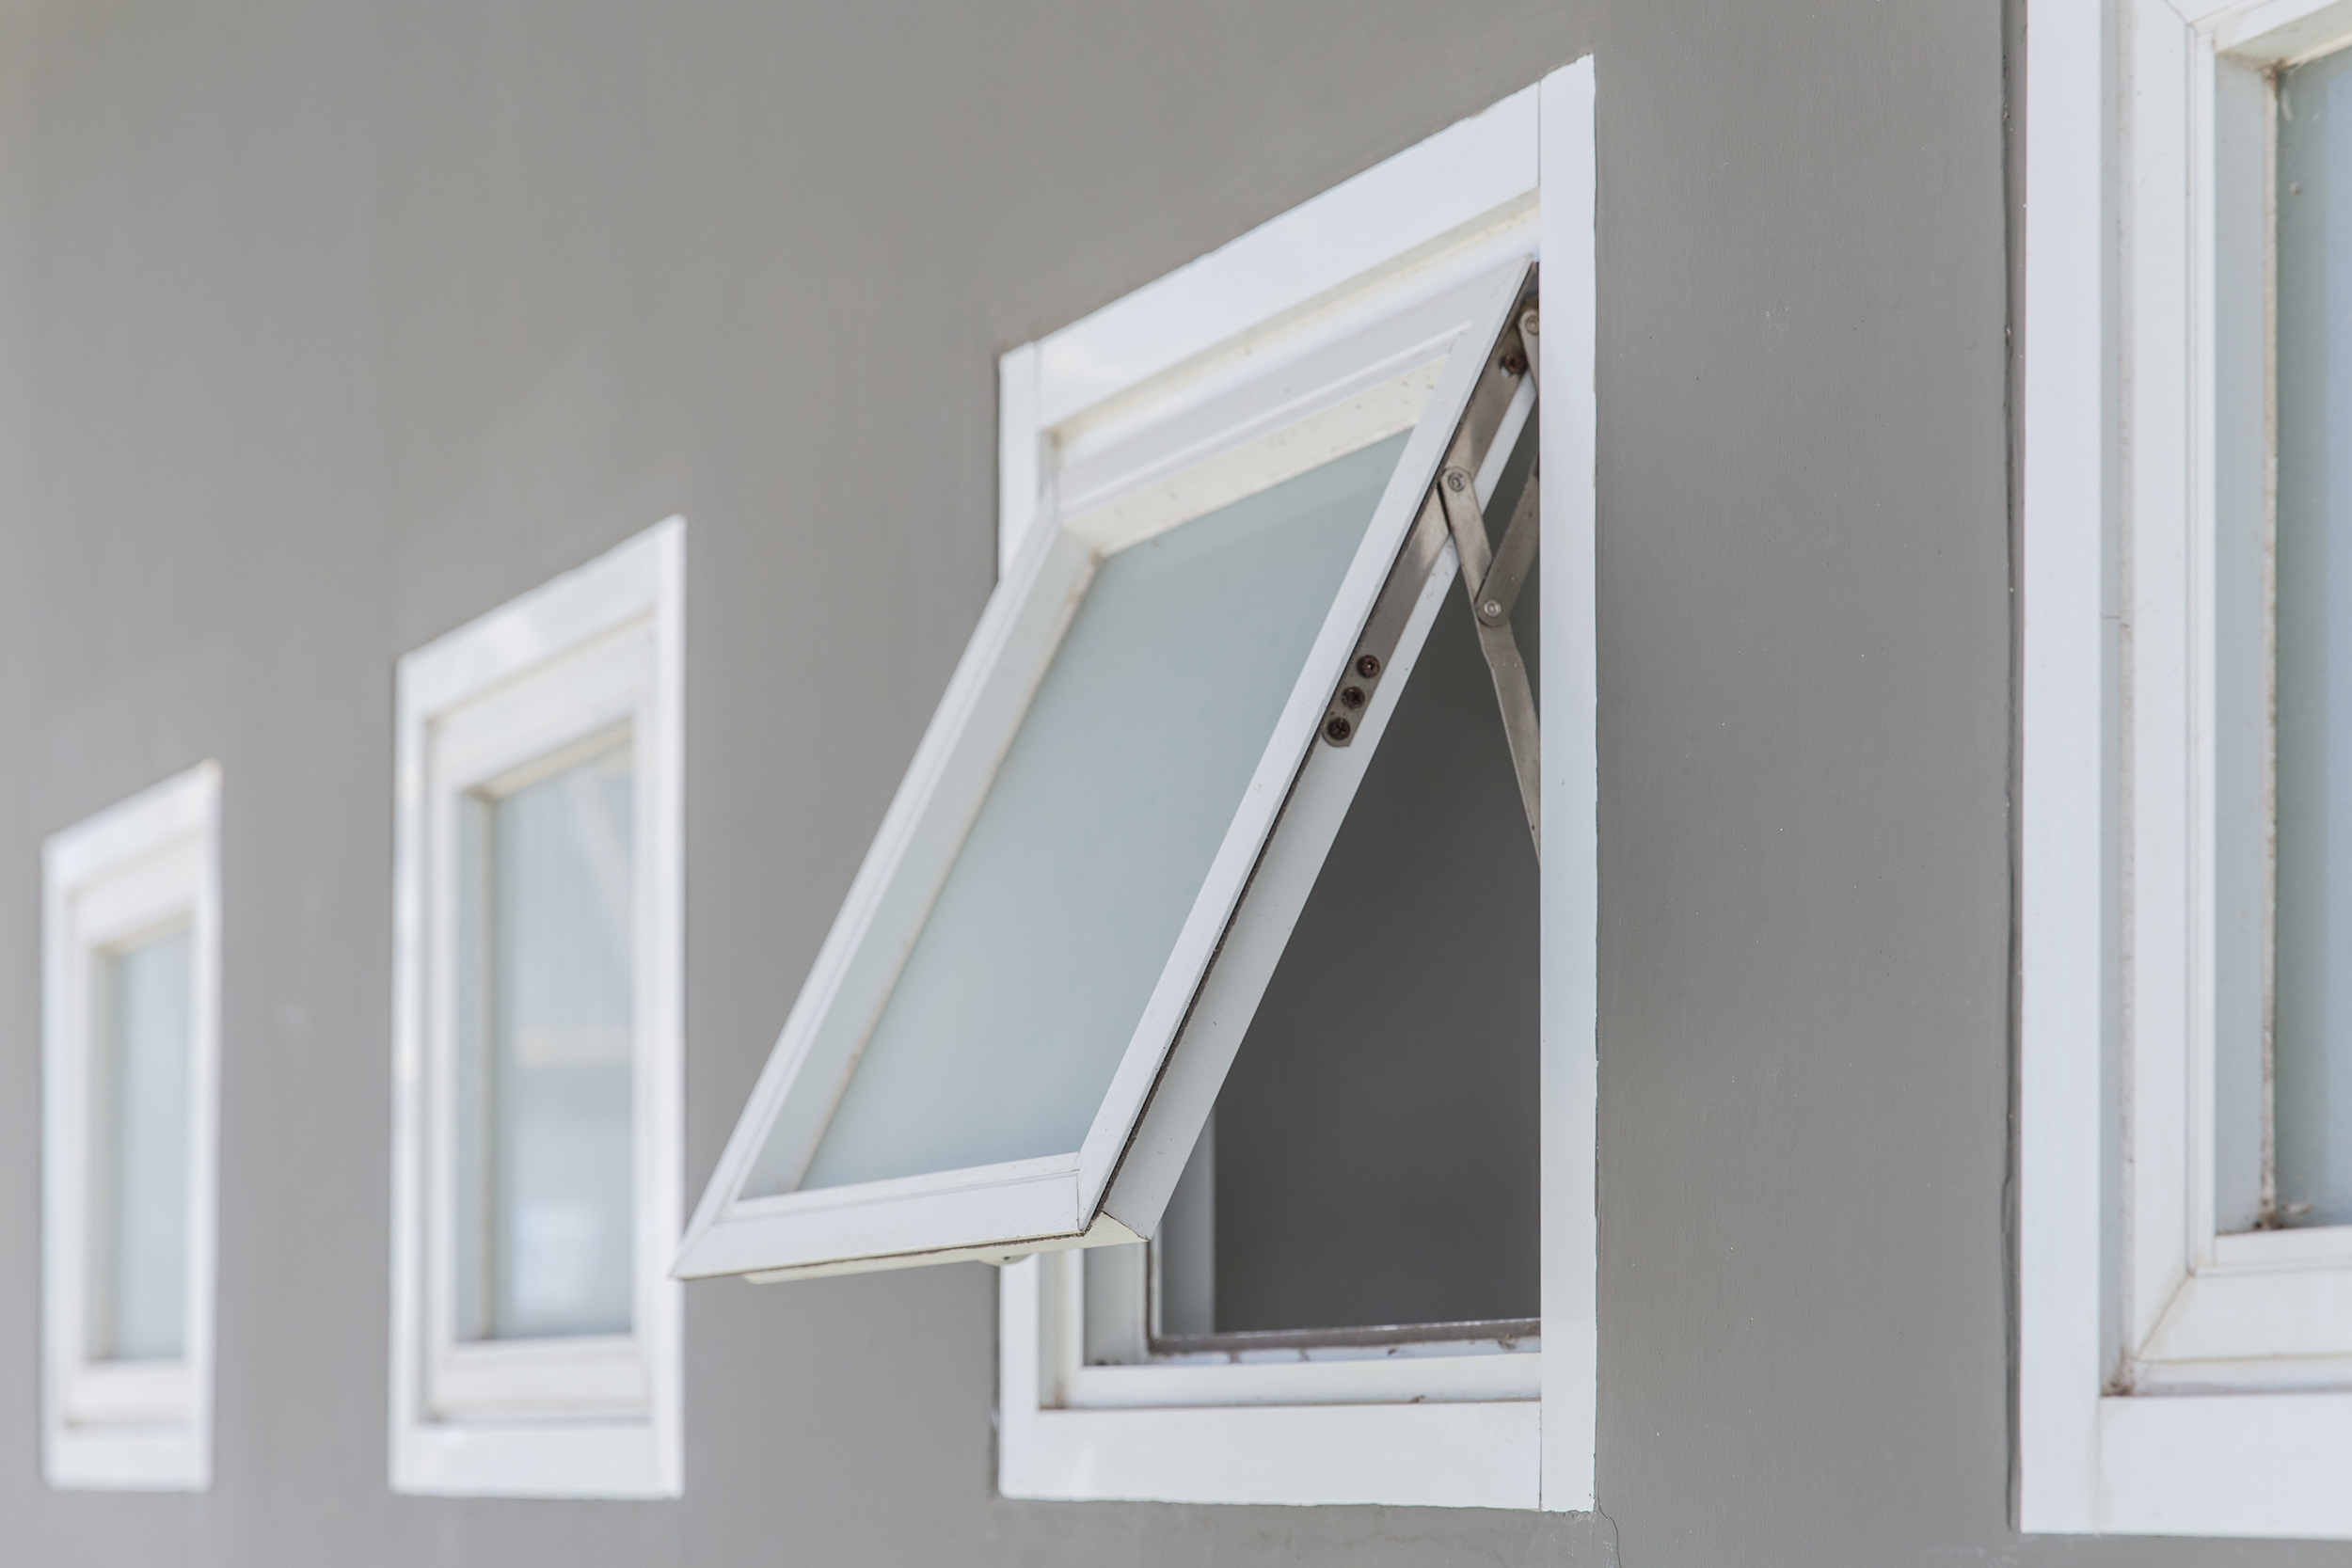 Awning windows are ideal for Oakland County and Macomb County, Michigan, homes. Contact DeYonker Window & Door for Andersen awning window installation.